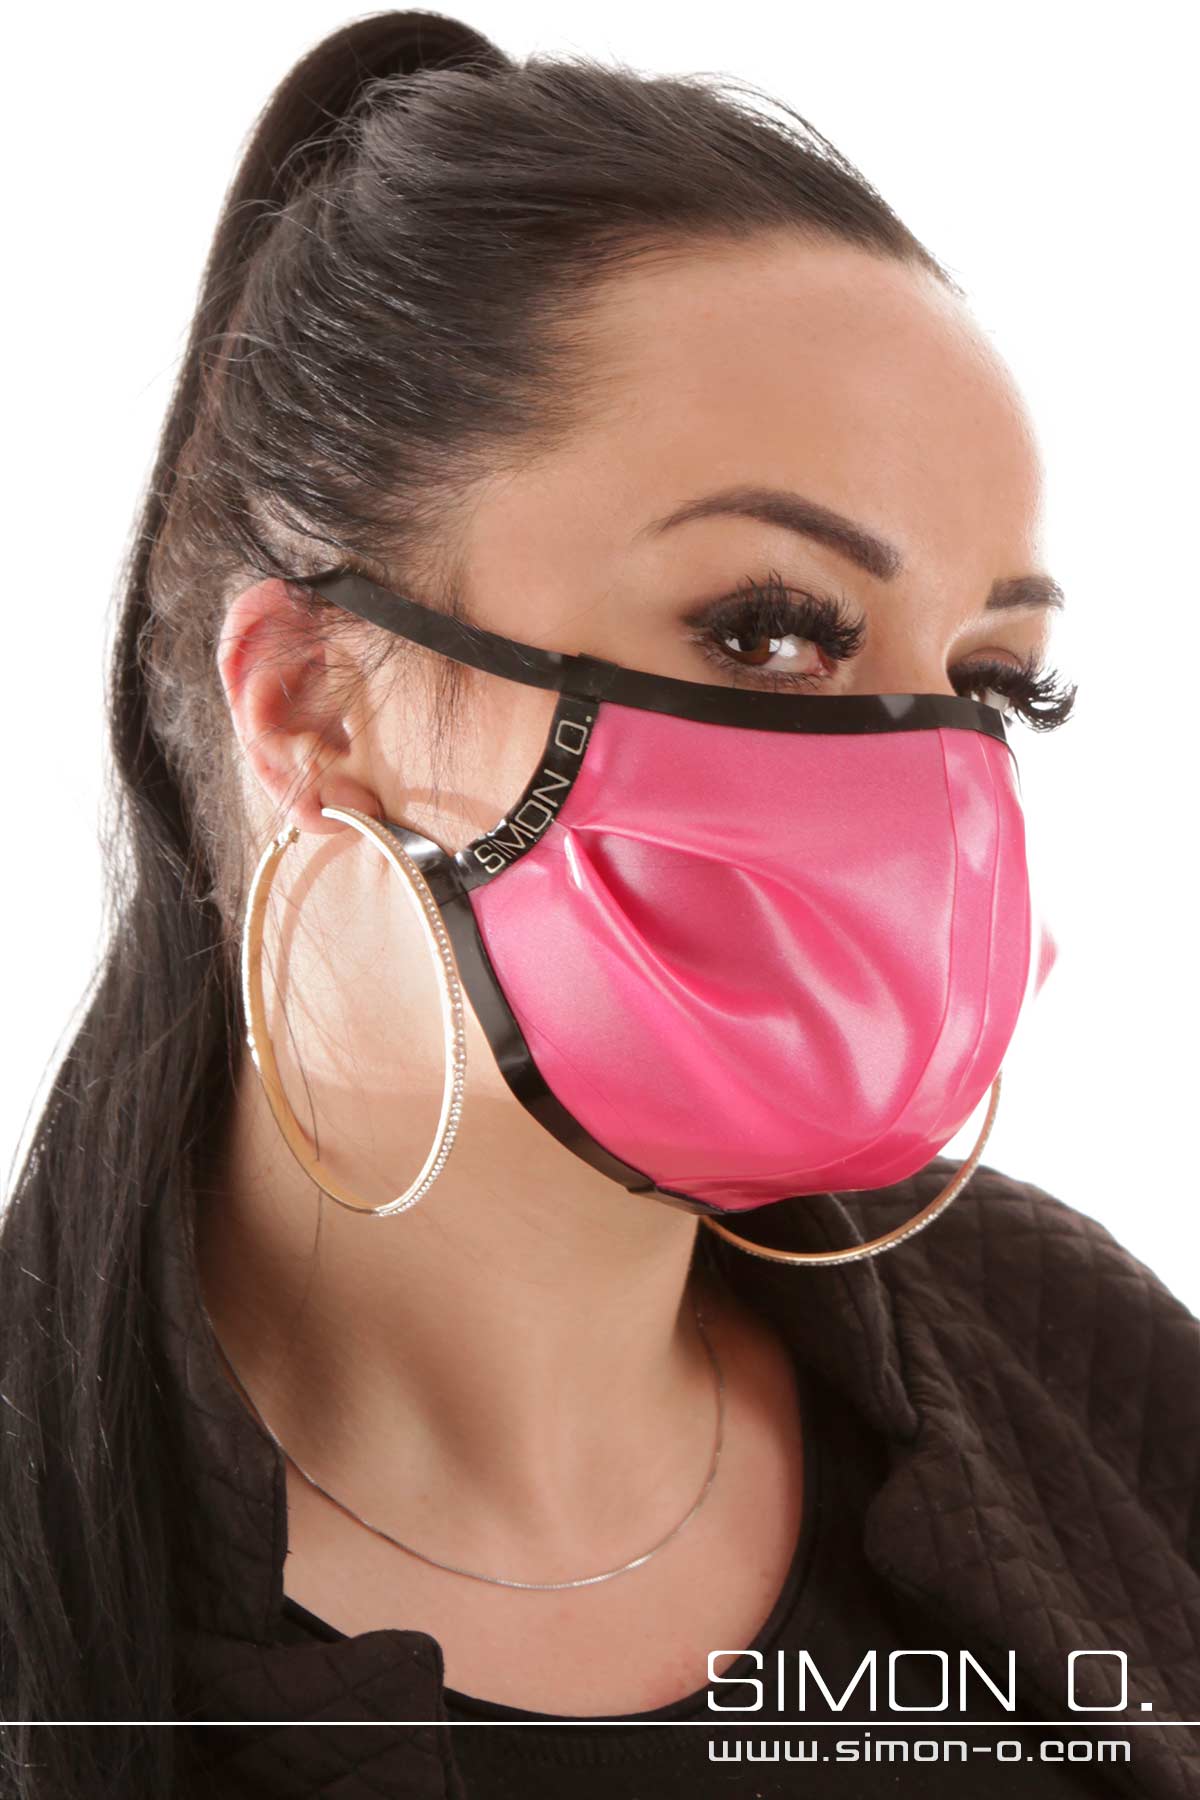 A woman is wearing a shiny latex mouth and nose guard in pink combined with black.